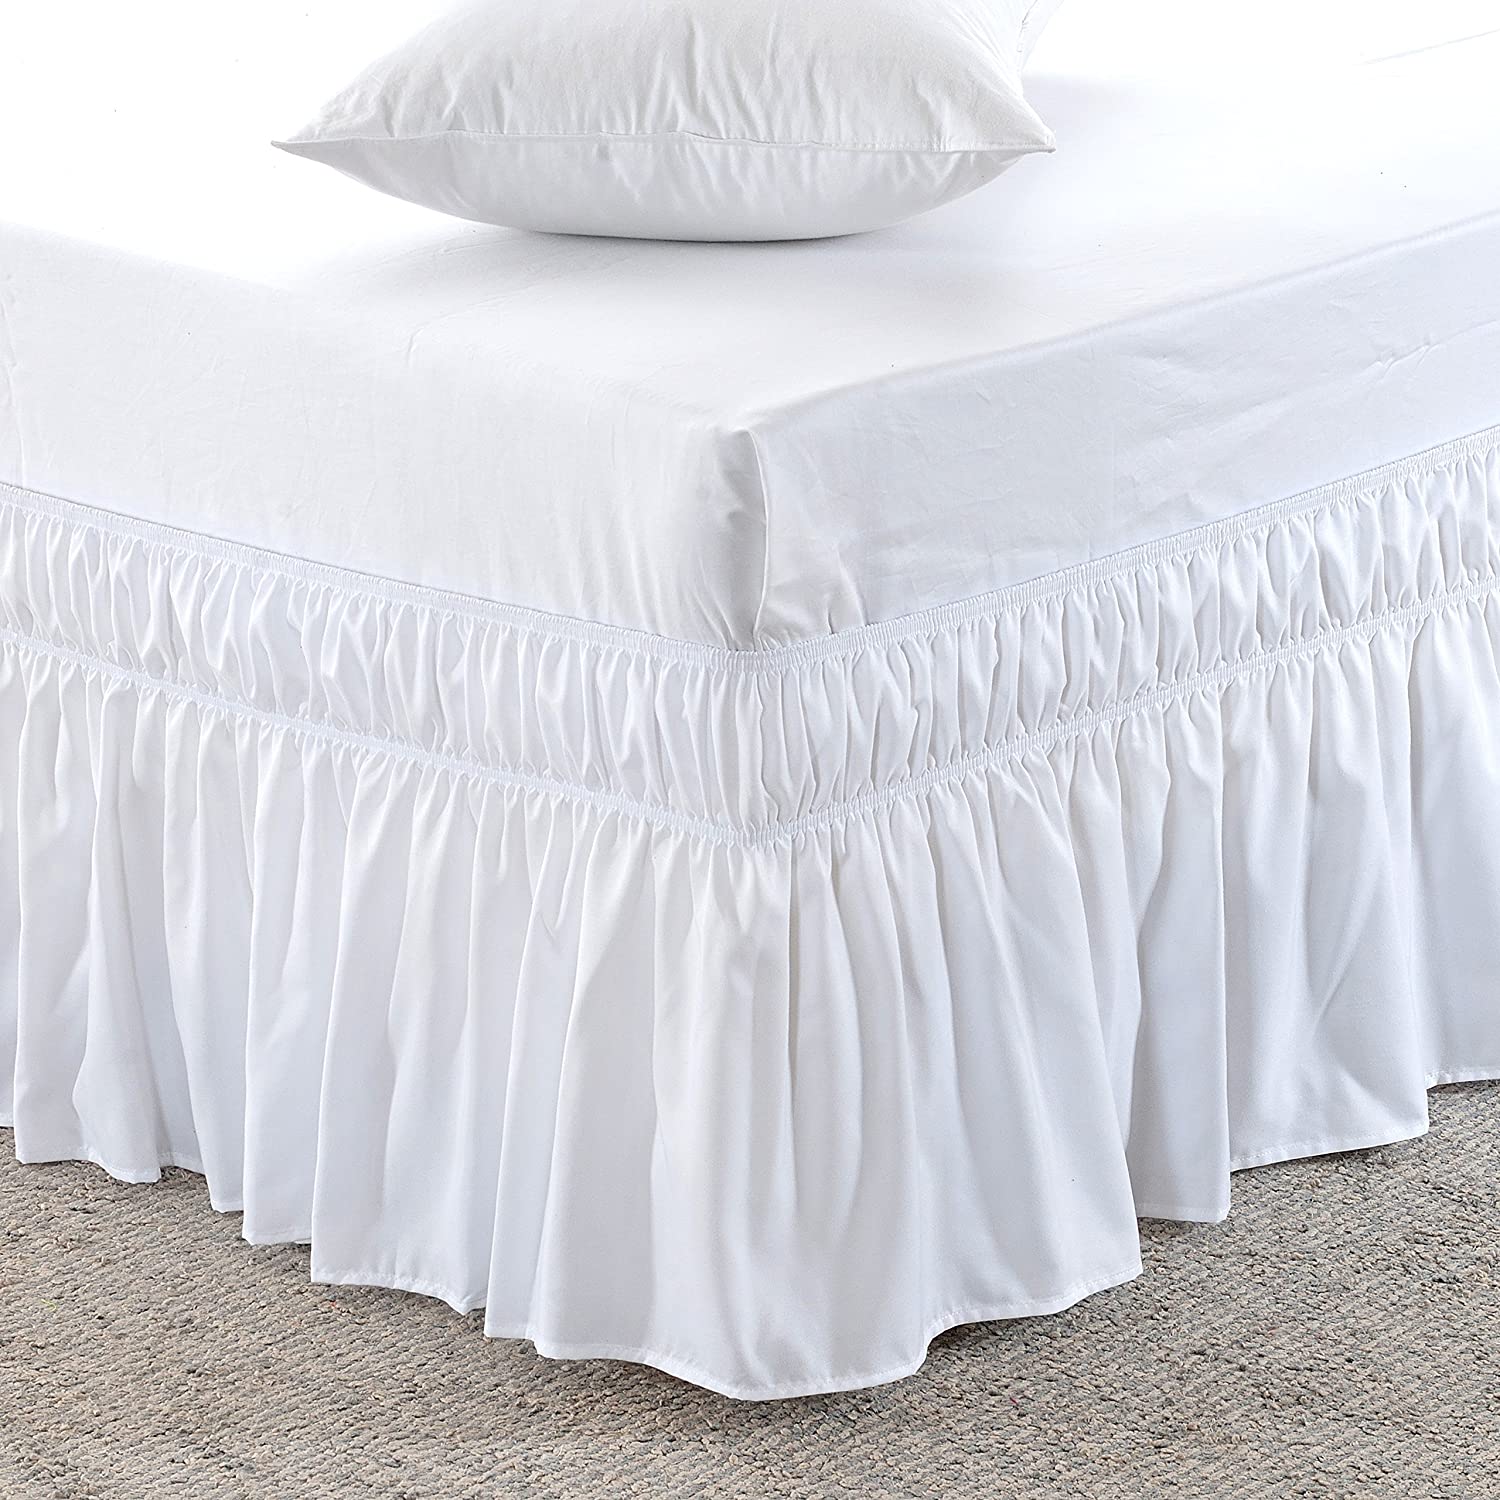 A bed skirt can cover a bed skirt shoe organizer quite easily.